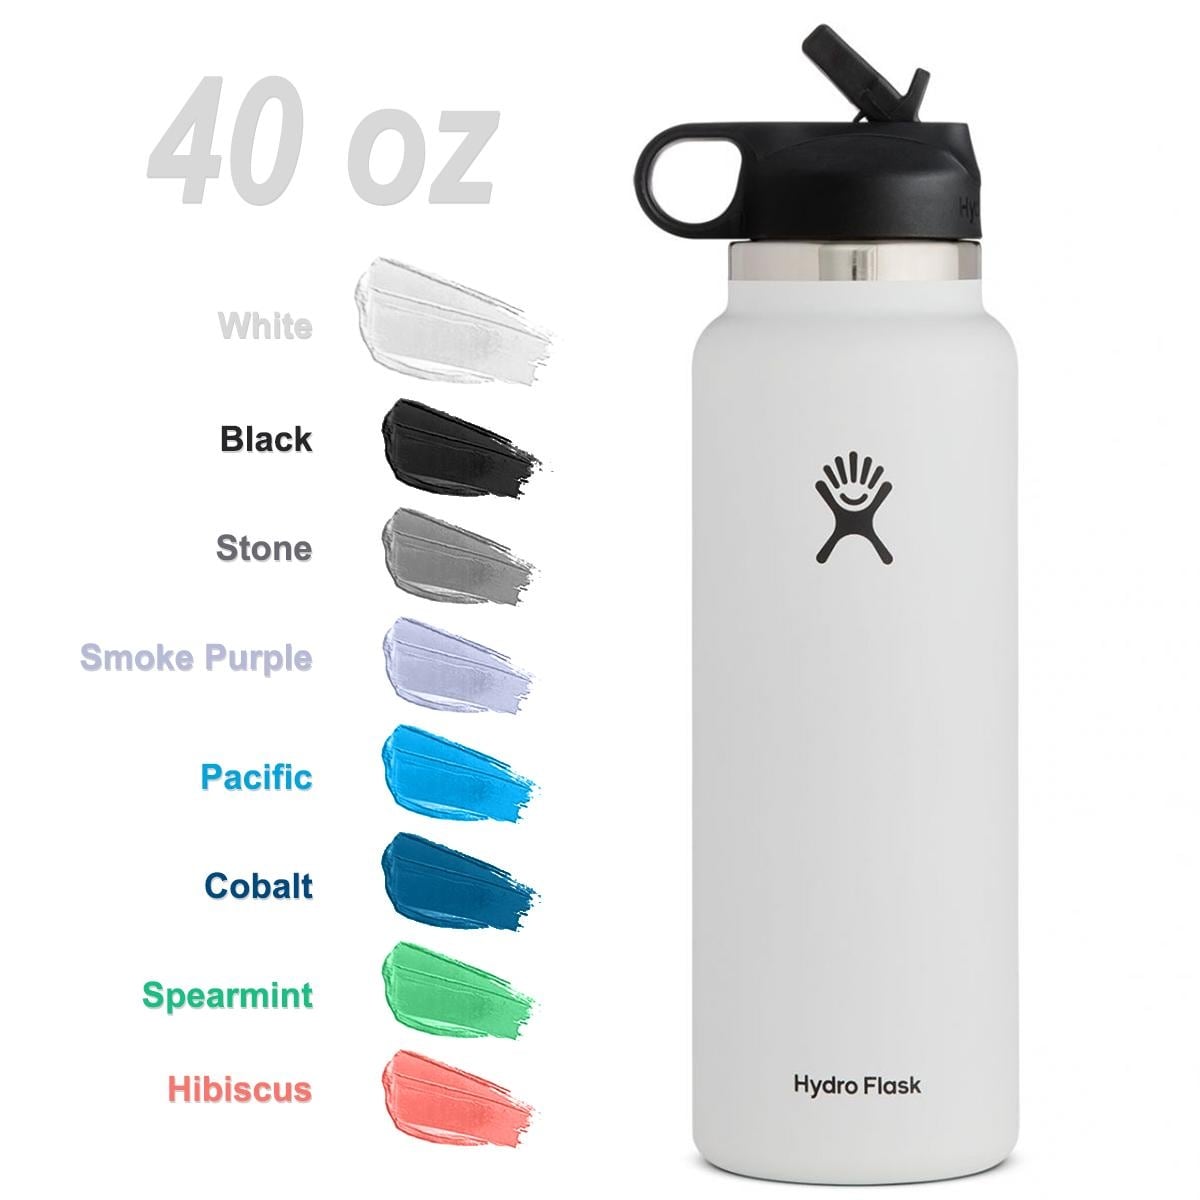 Hydro Flask 40oz Wide Mouth Bottle, White